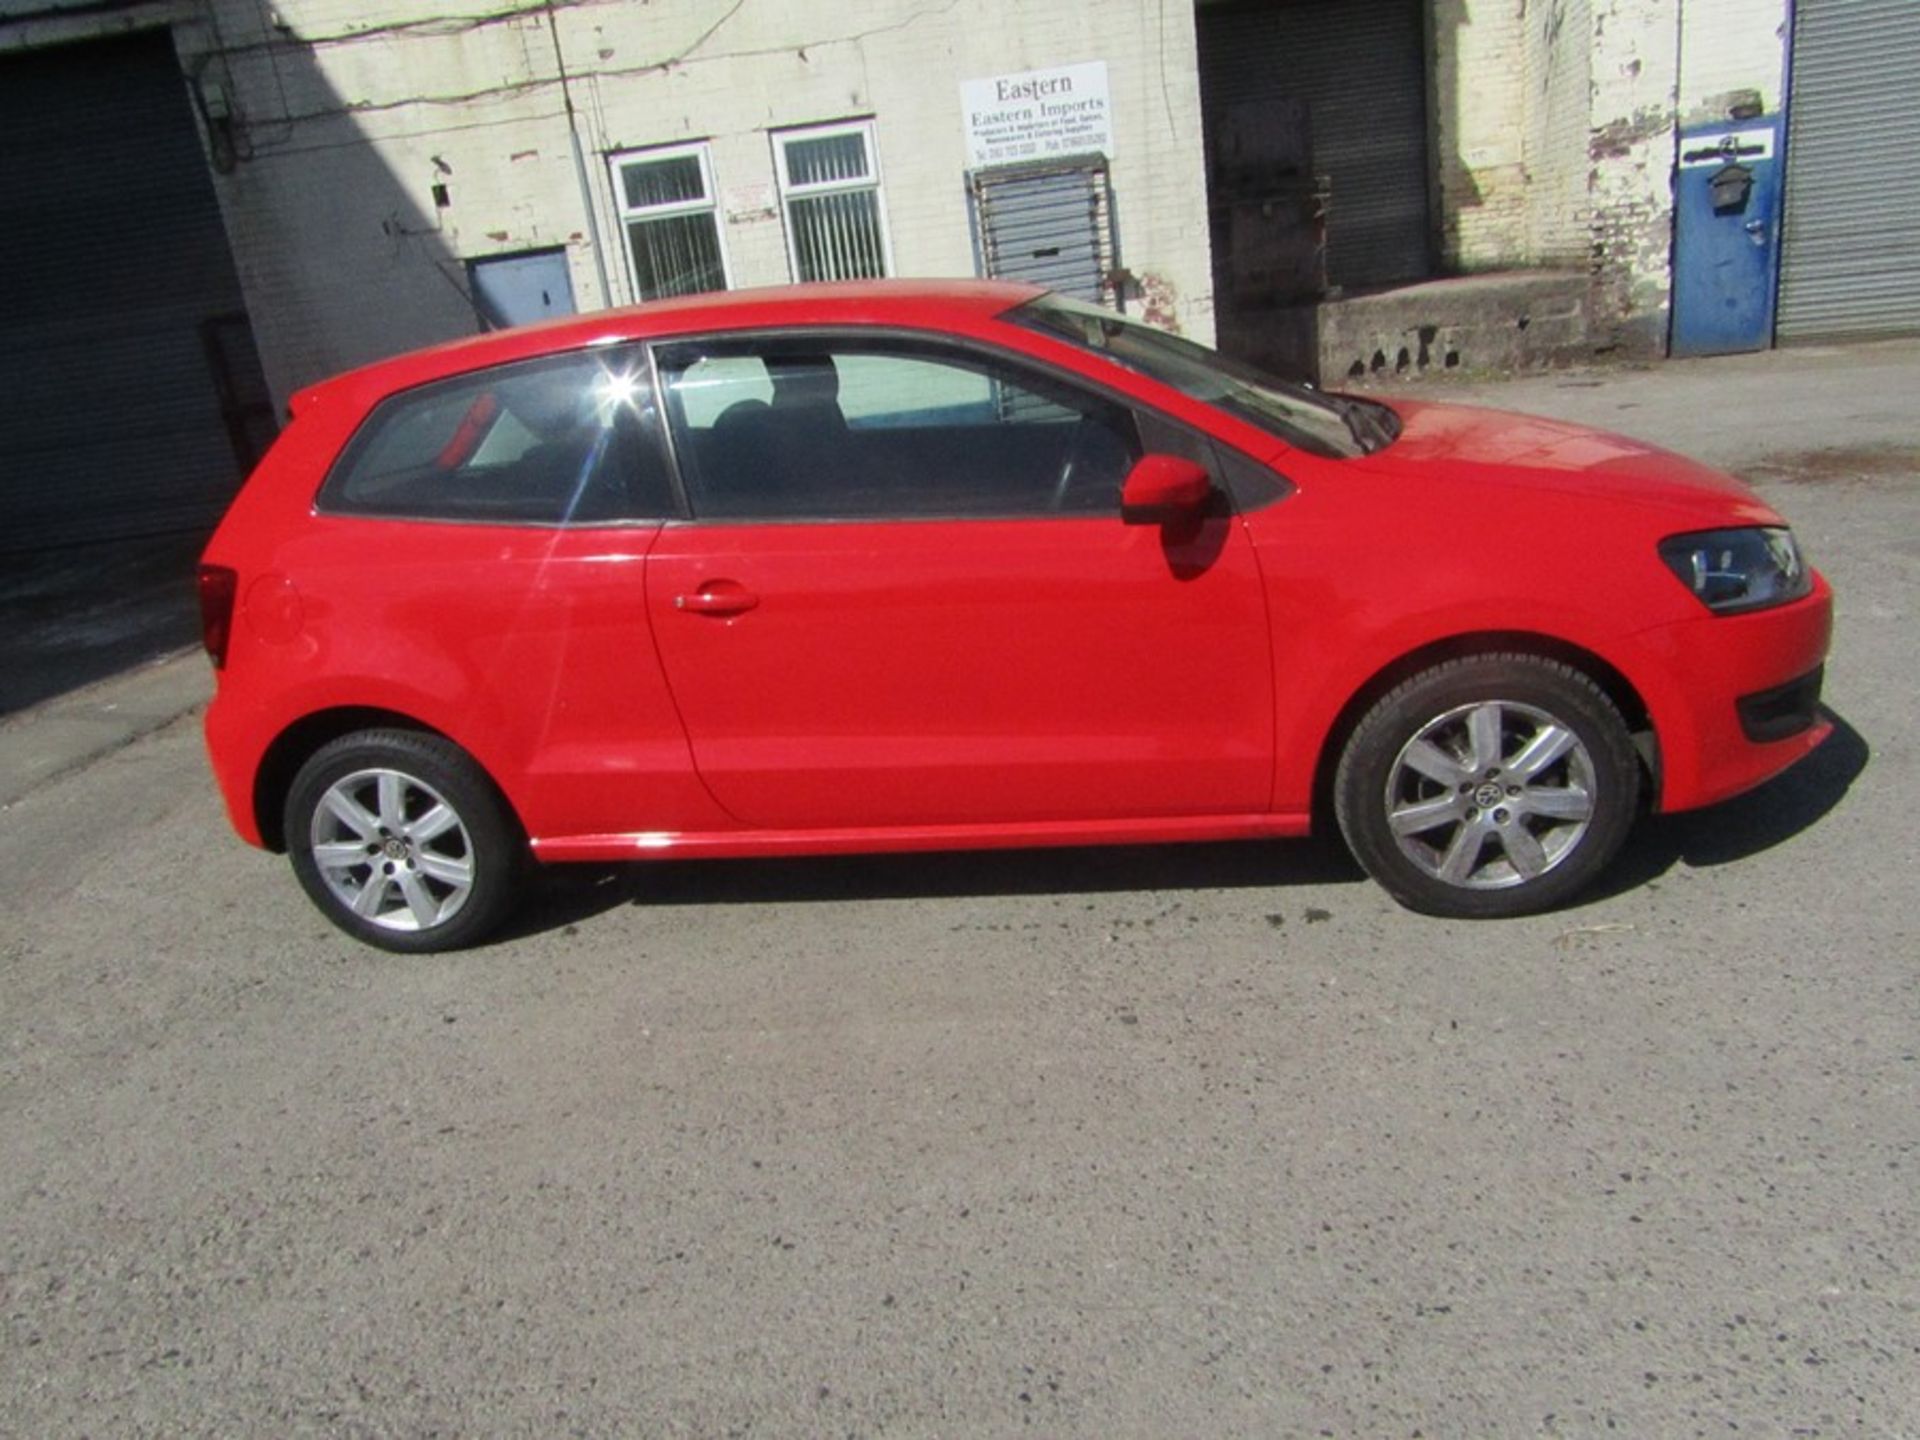 60 Plate Volkswagon Polo SE 1.2, 86,828 miles which appears to match up with previous MOT's (this - Image 2 of 10